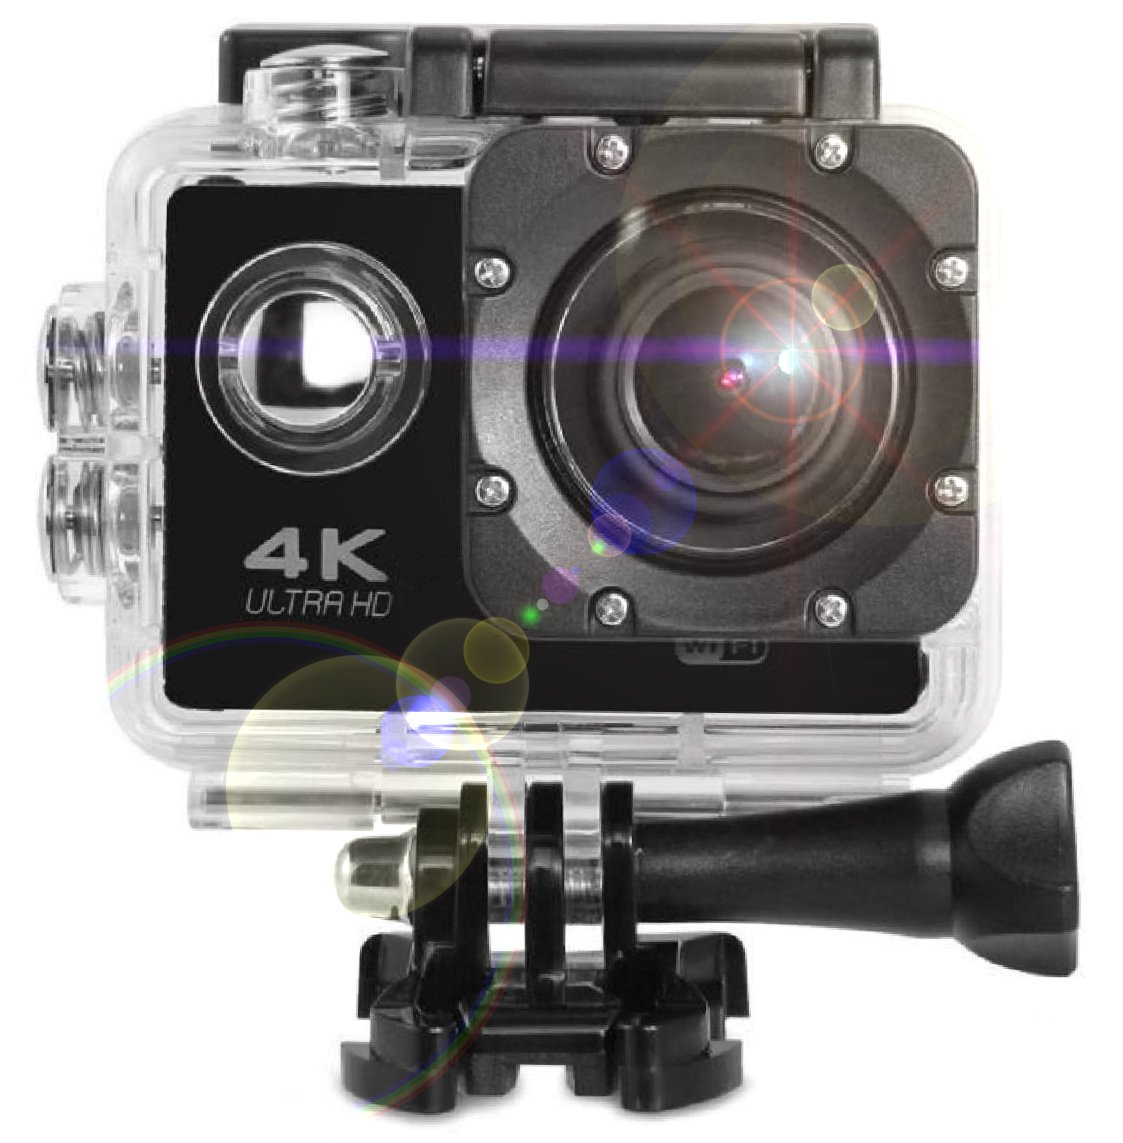 Picture of Gli Pro 4K HD Action Camera with Driving Mode & Slow Motion Sports Attachments Supports up to 64 GB Micro SD Card